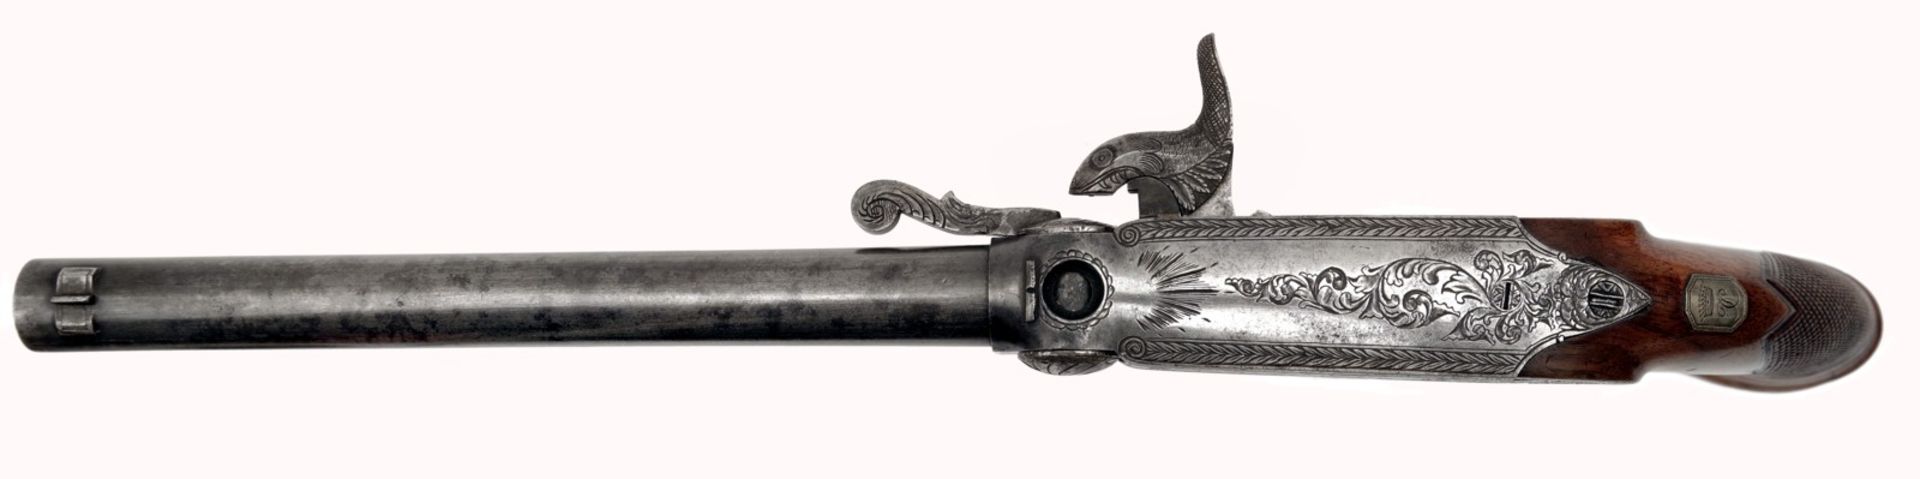 A Sidehammer Pistols with Pellet Primer System by Carl Daniel Tanner in Hannover - Image 3 of 8